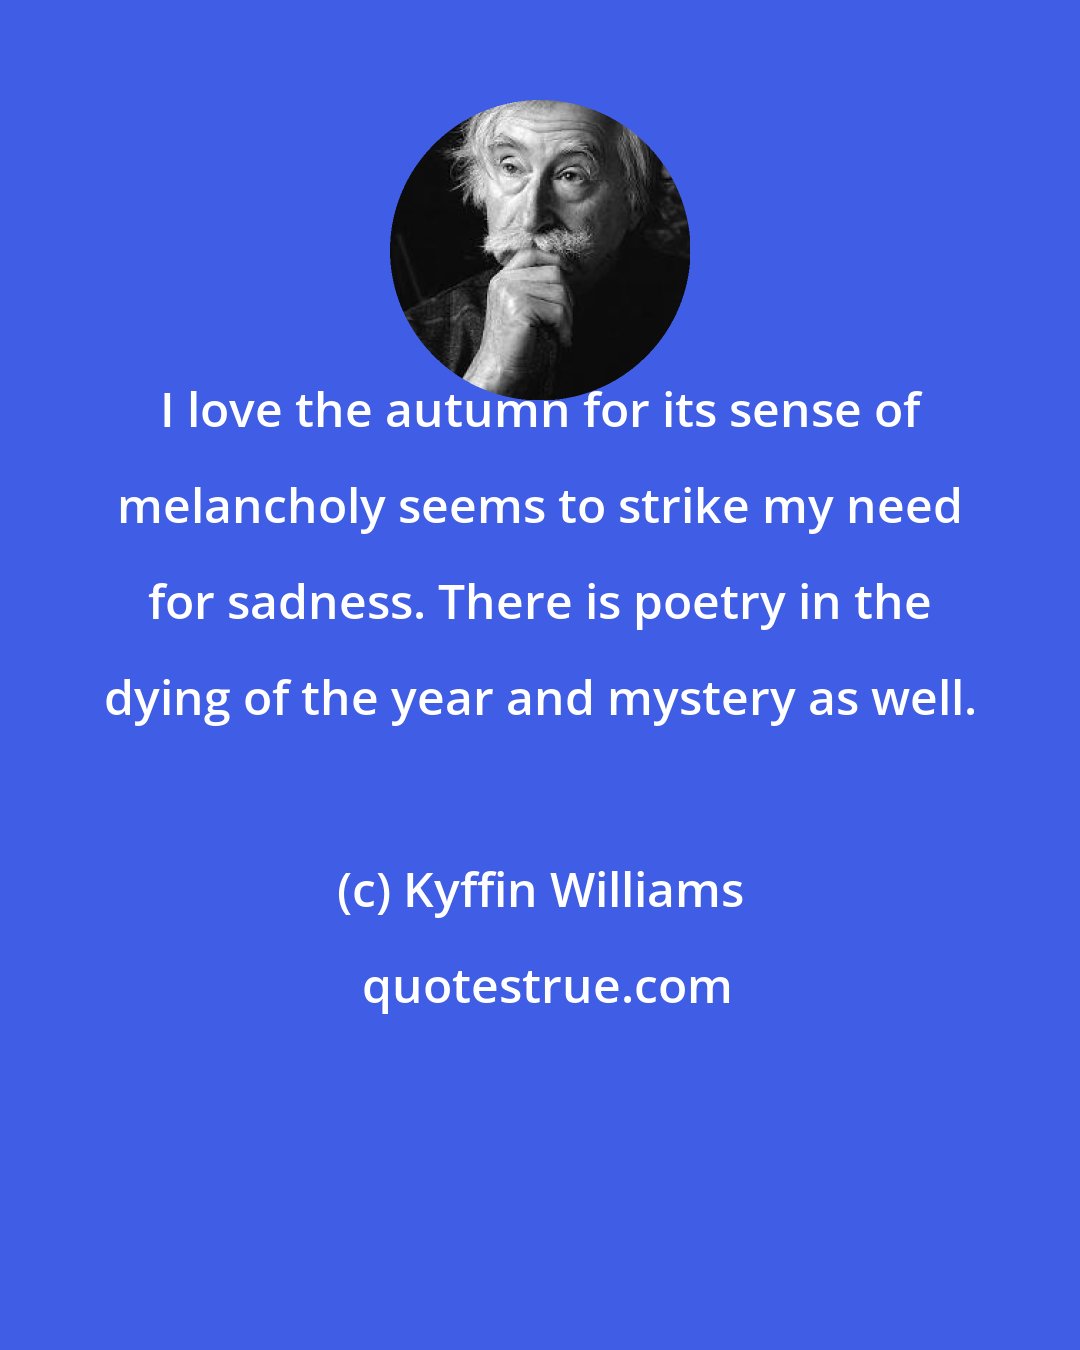 Kyffin Williams: I love the autumn for its sense of melancholy seems to strike my need for sadness. There is poetry in the dying of the year and mystery as well.